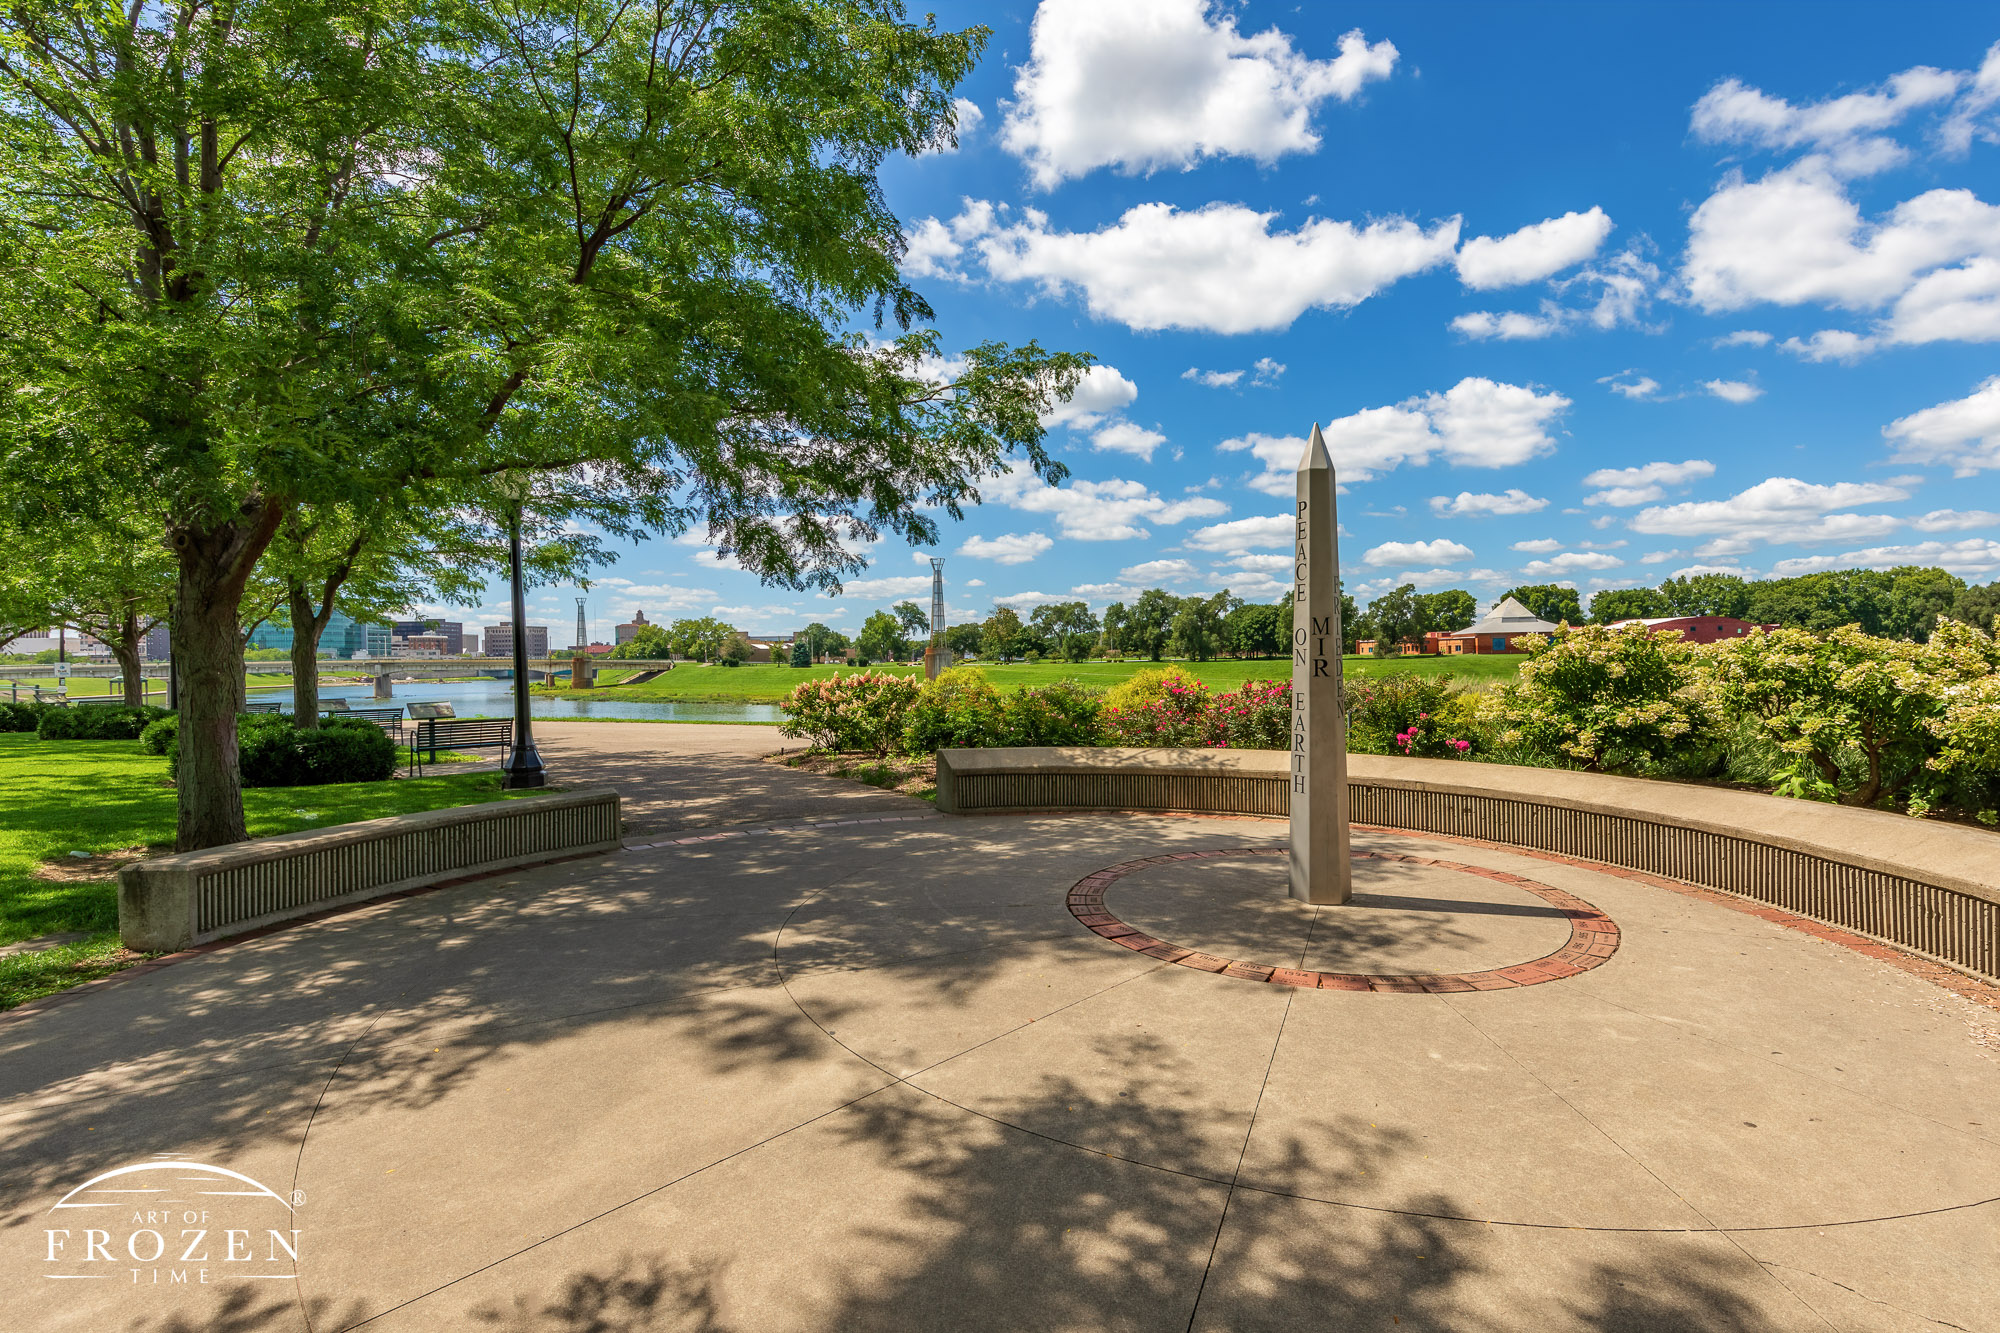 The Dayton Peace Pole Monument surrounding by gardens on the perfect Miami Valley day